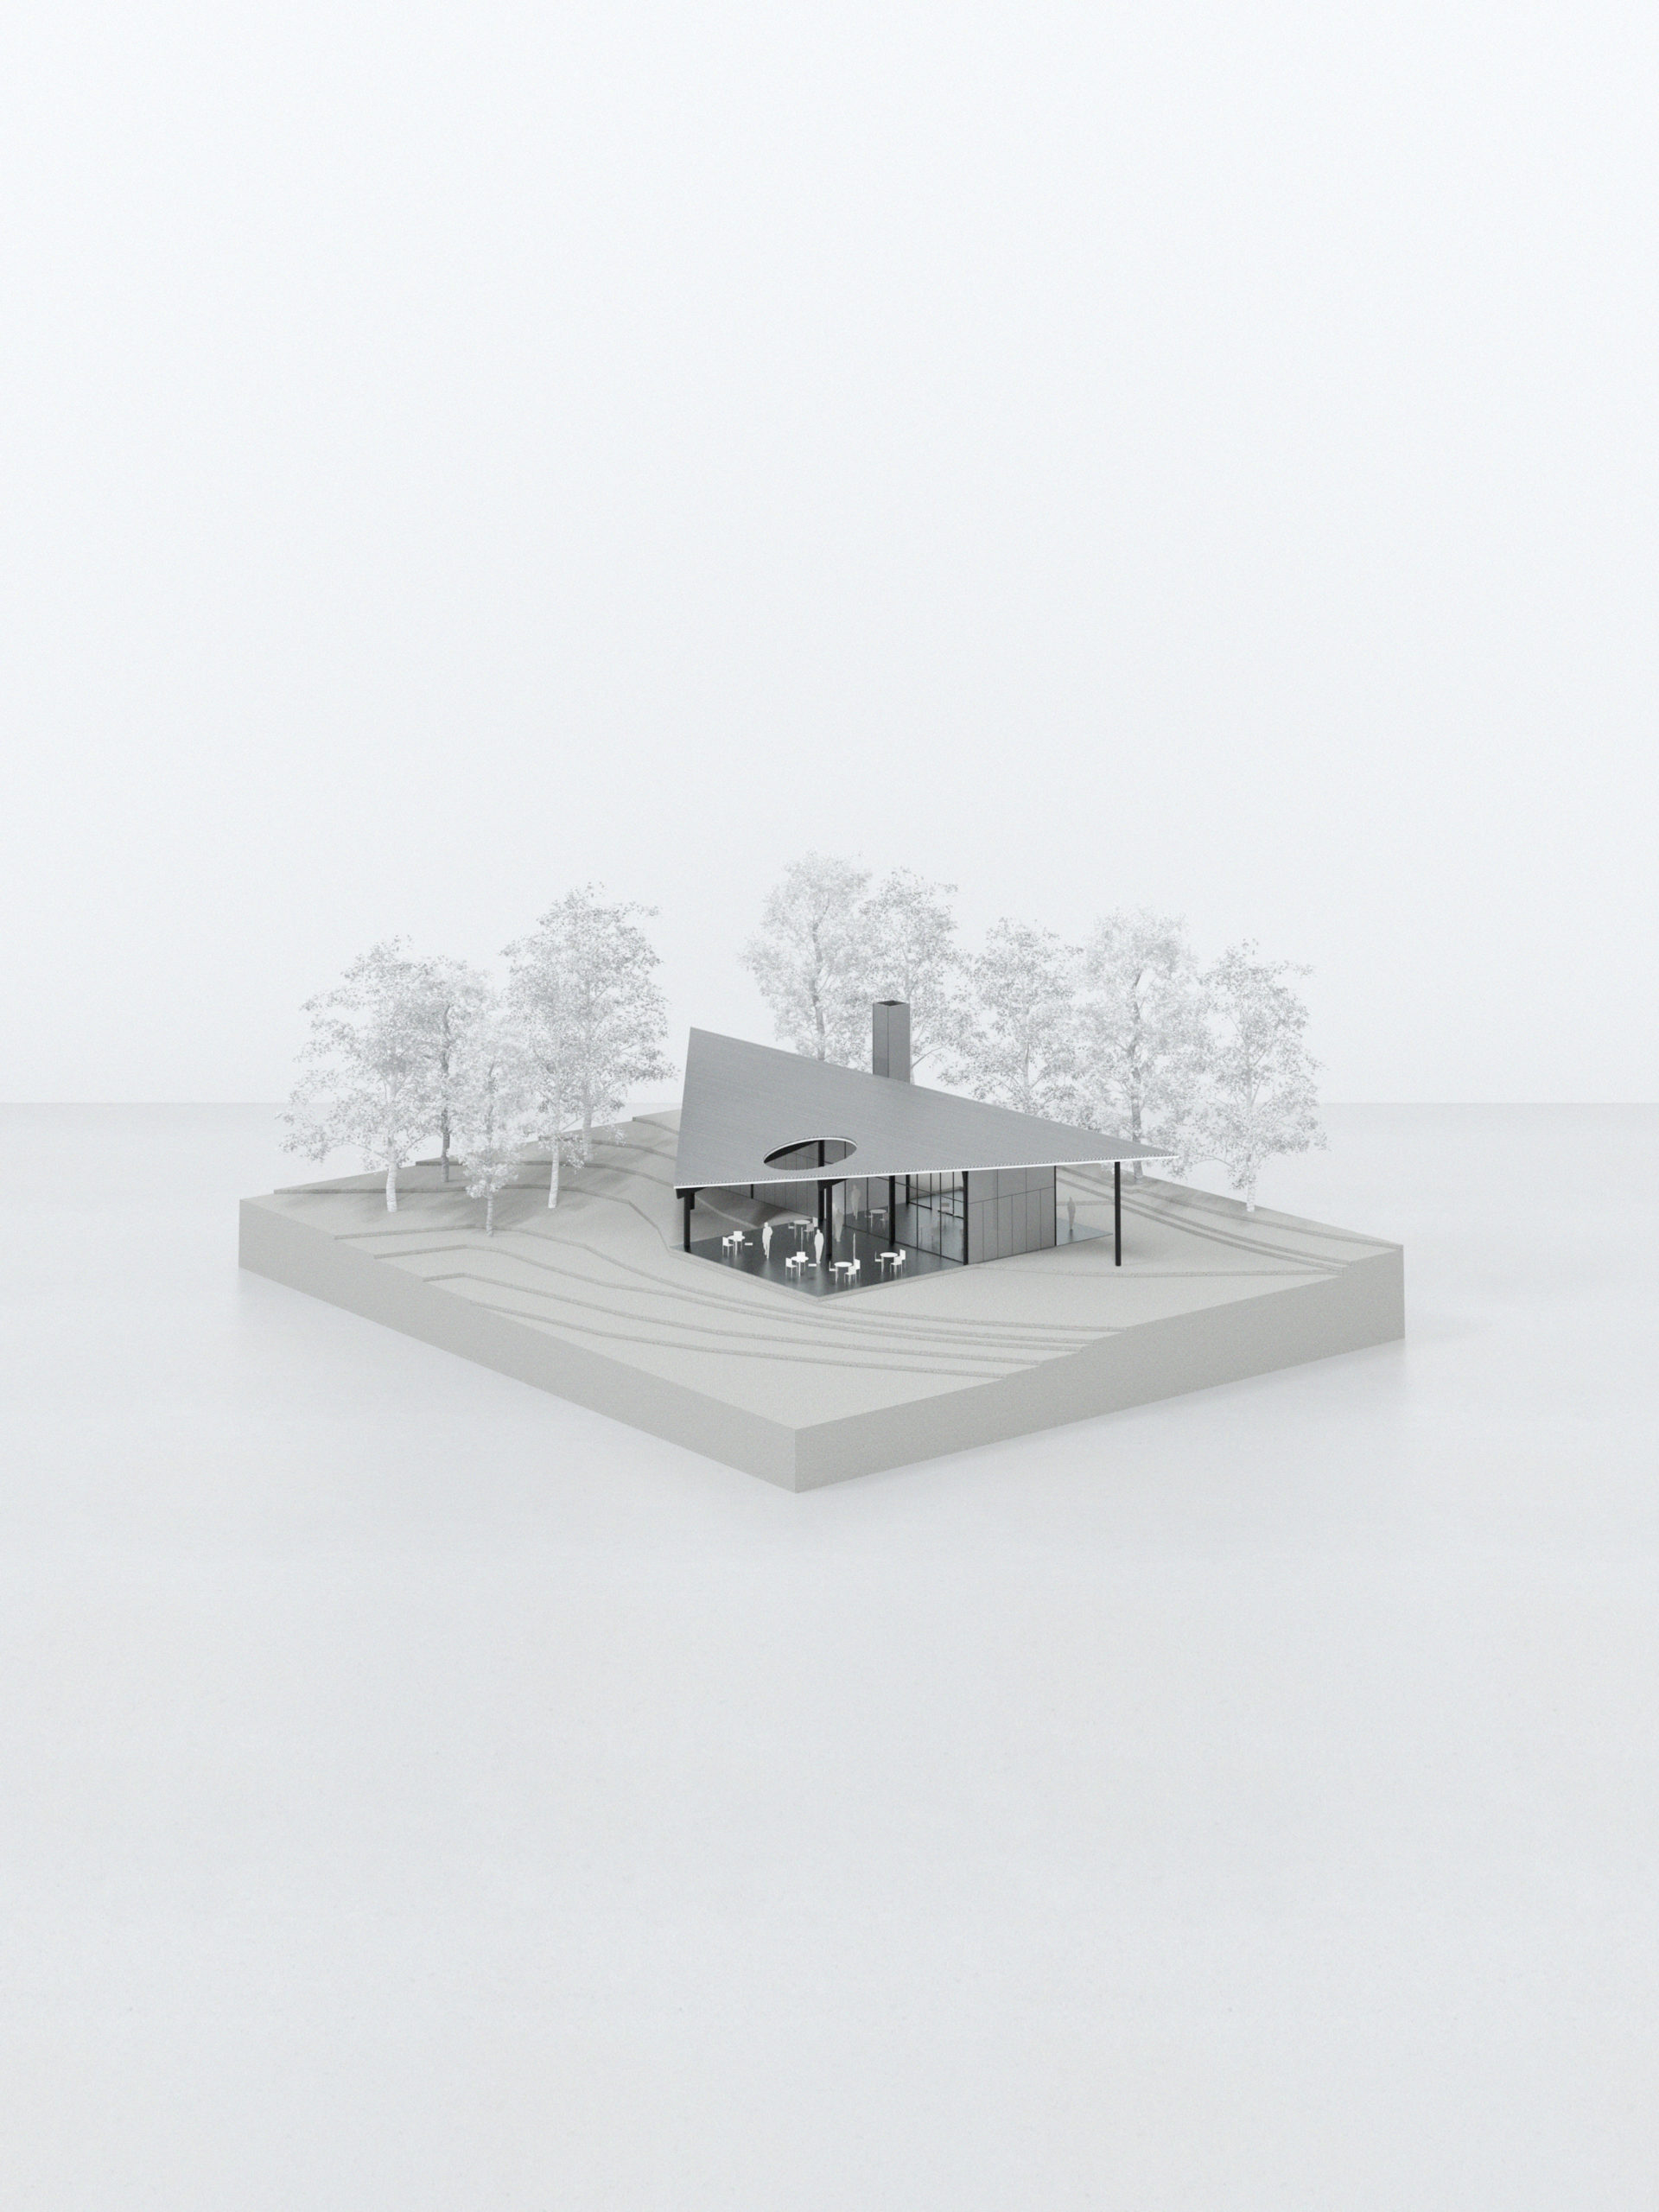 P02 : Proposal for the new Pavillon im Park in Zürich